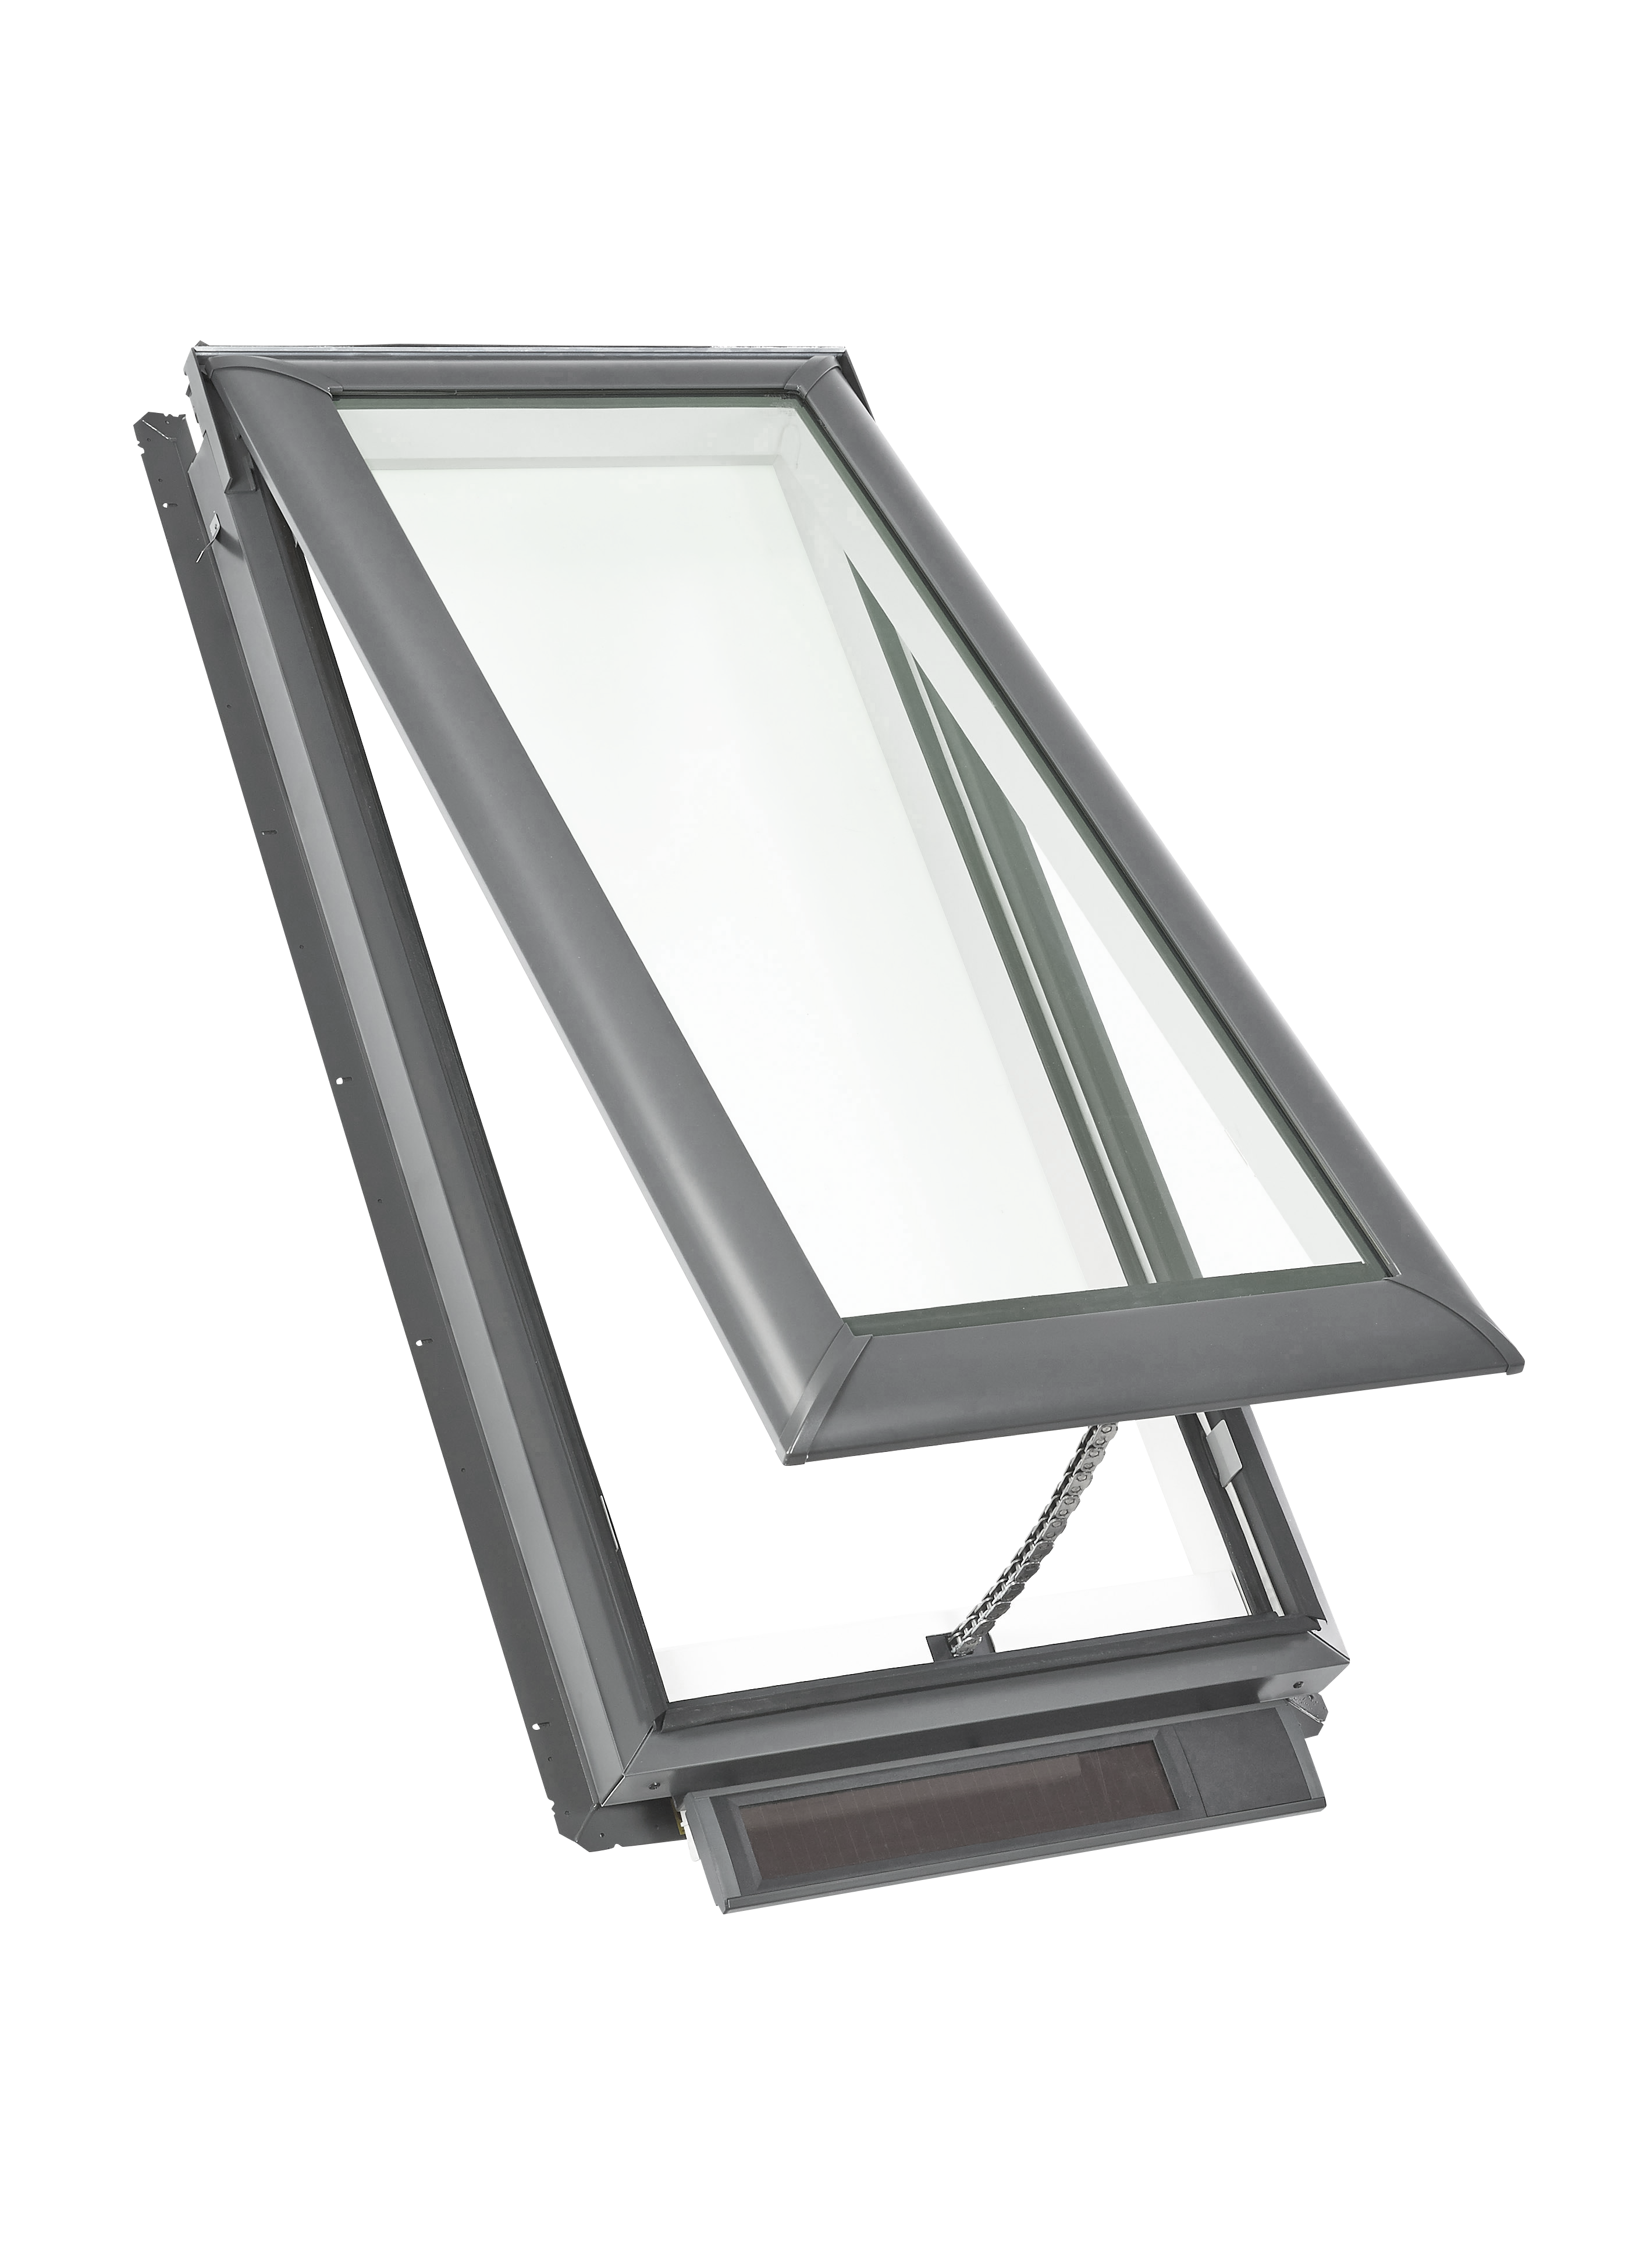 VELUX Skylights by DryHome Roofing & Siding, Inc DryHome Roofing & Siding, Inc. Sterling (703)230-7663